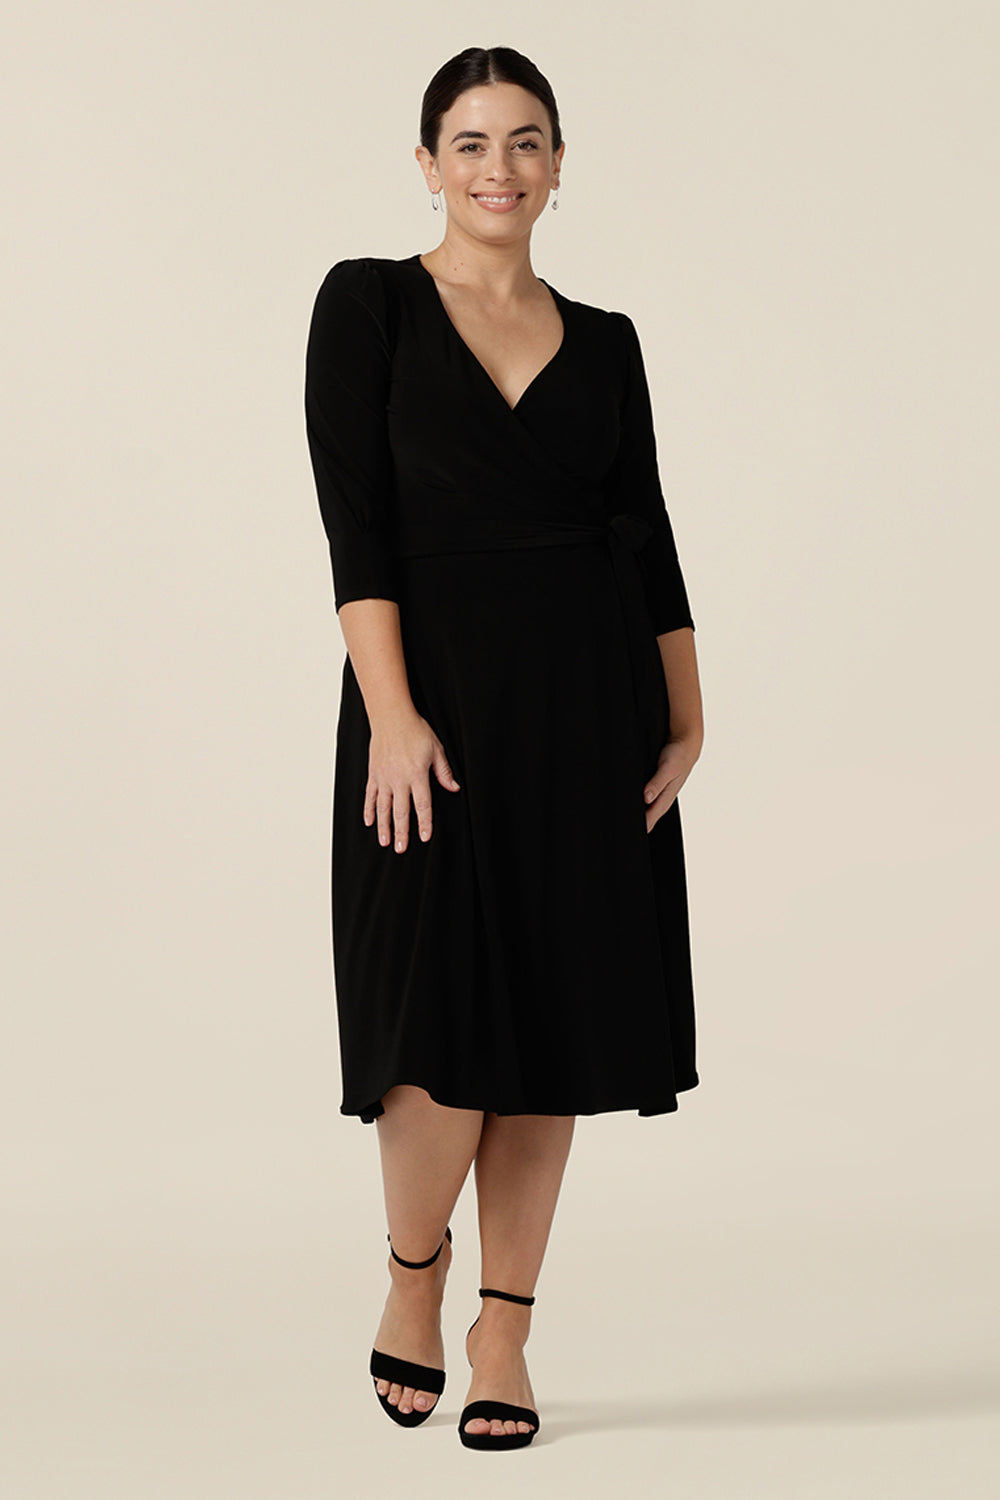 A knee length wrap dress in black jersey looks elegant for evening and occasion wear. Shown in size 10, this 3/4 sleeve classic event dress is made in Australia in dress sizes 8 to 24.